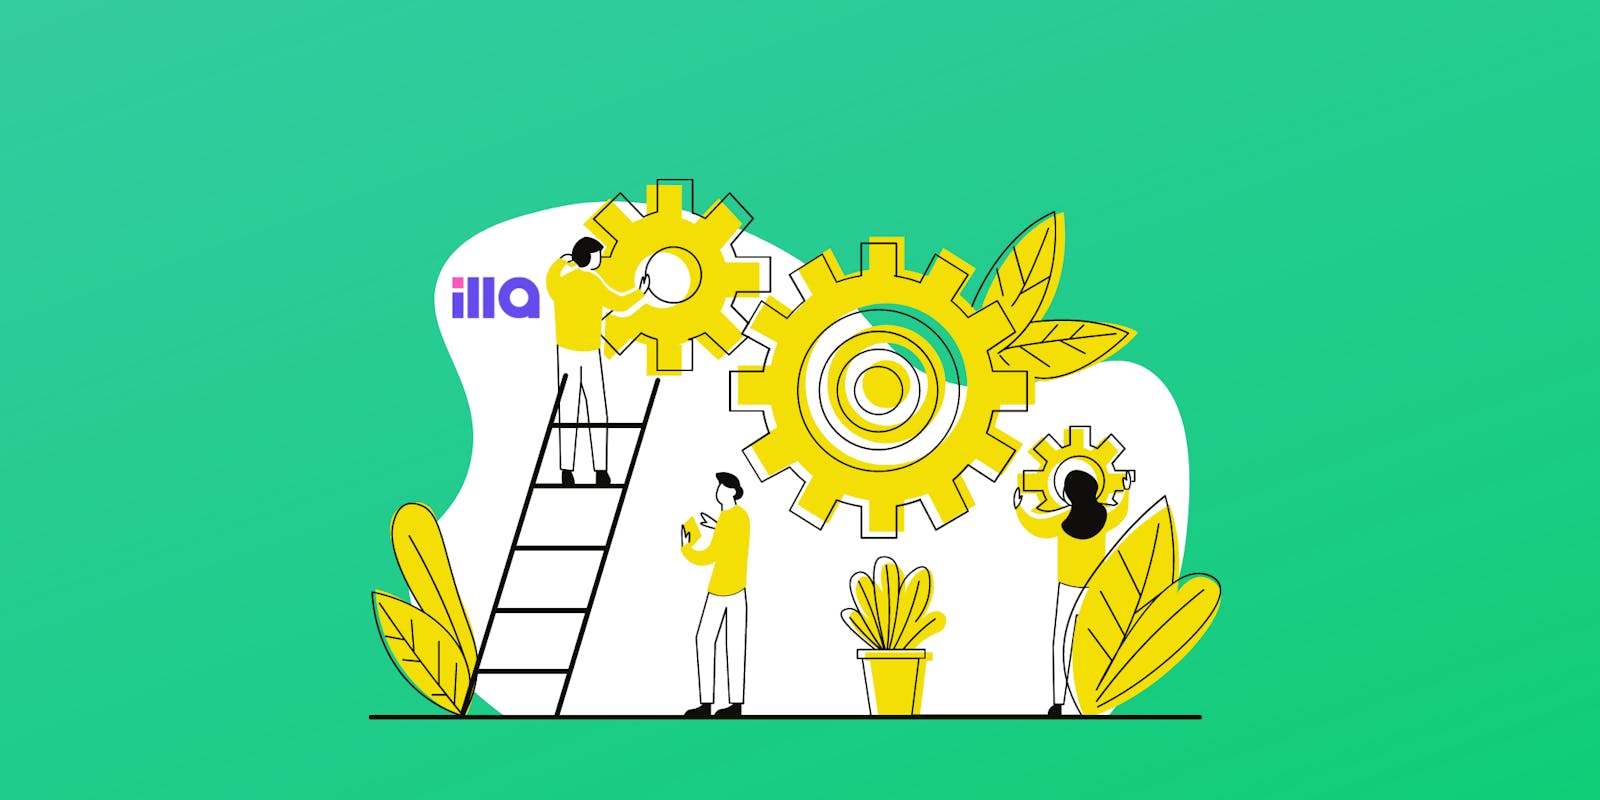 How to Automate Tasks with ILLA Cloud: A Low-Code Platform for Internal Tools